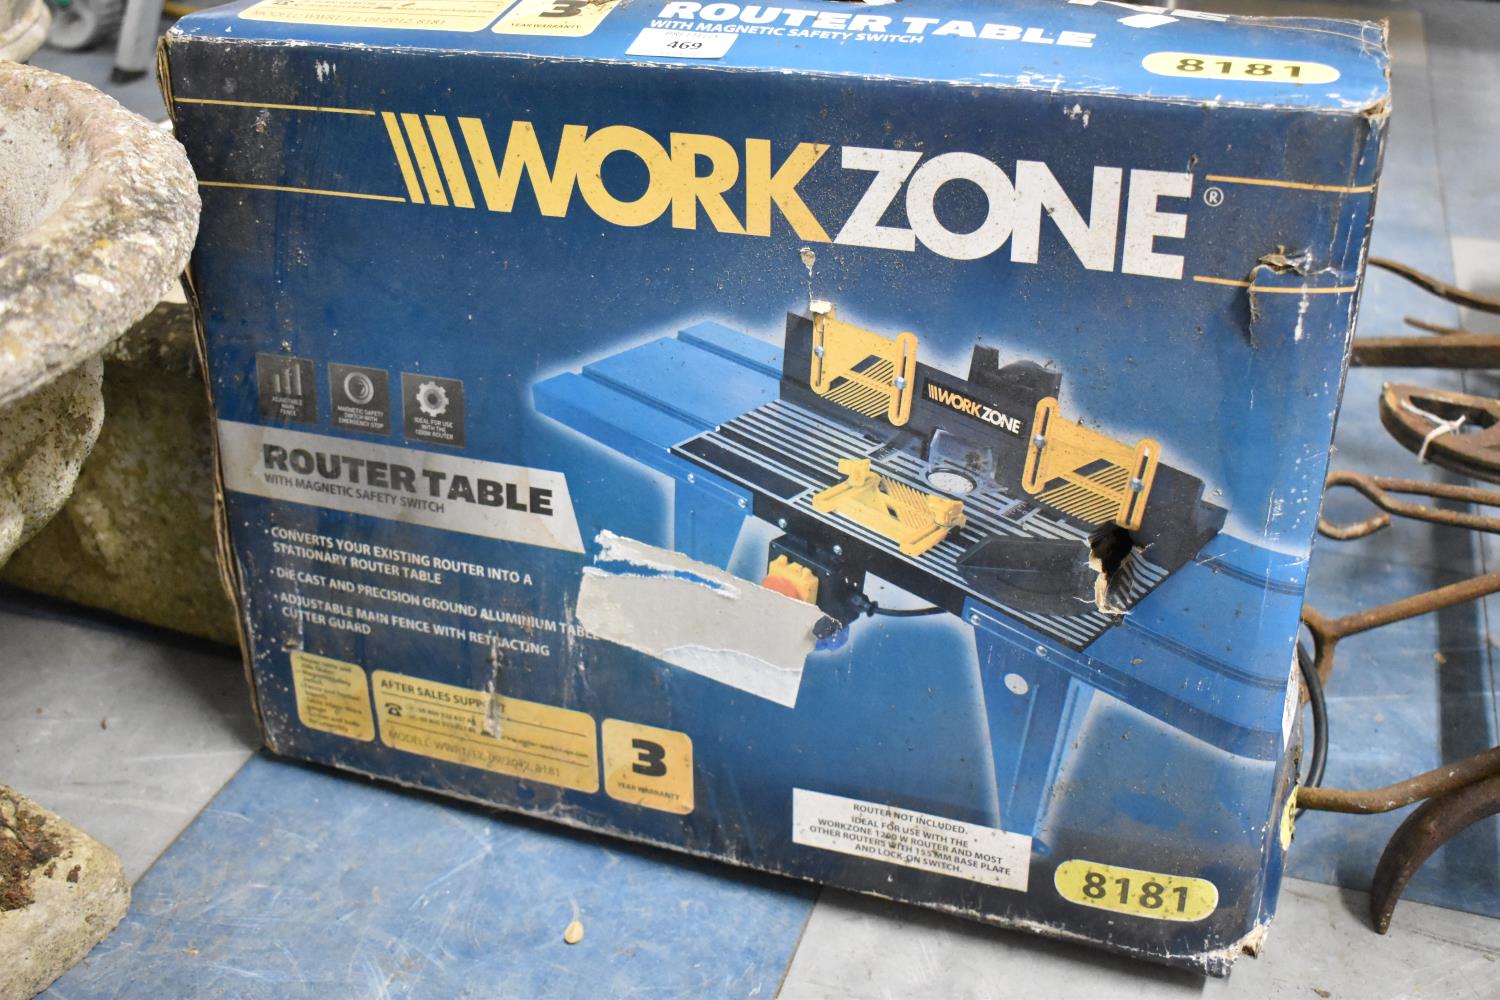 A Workzone Router Table